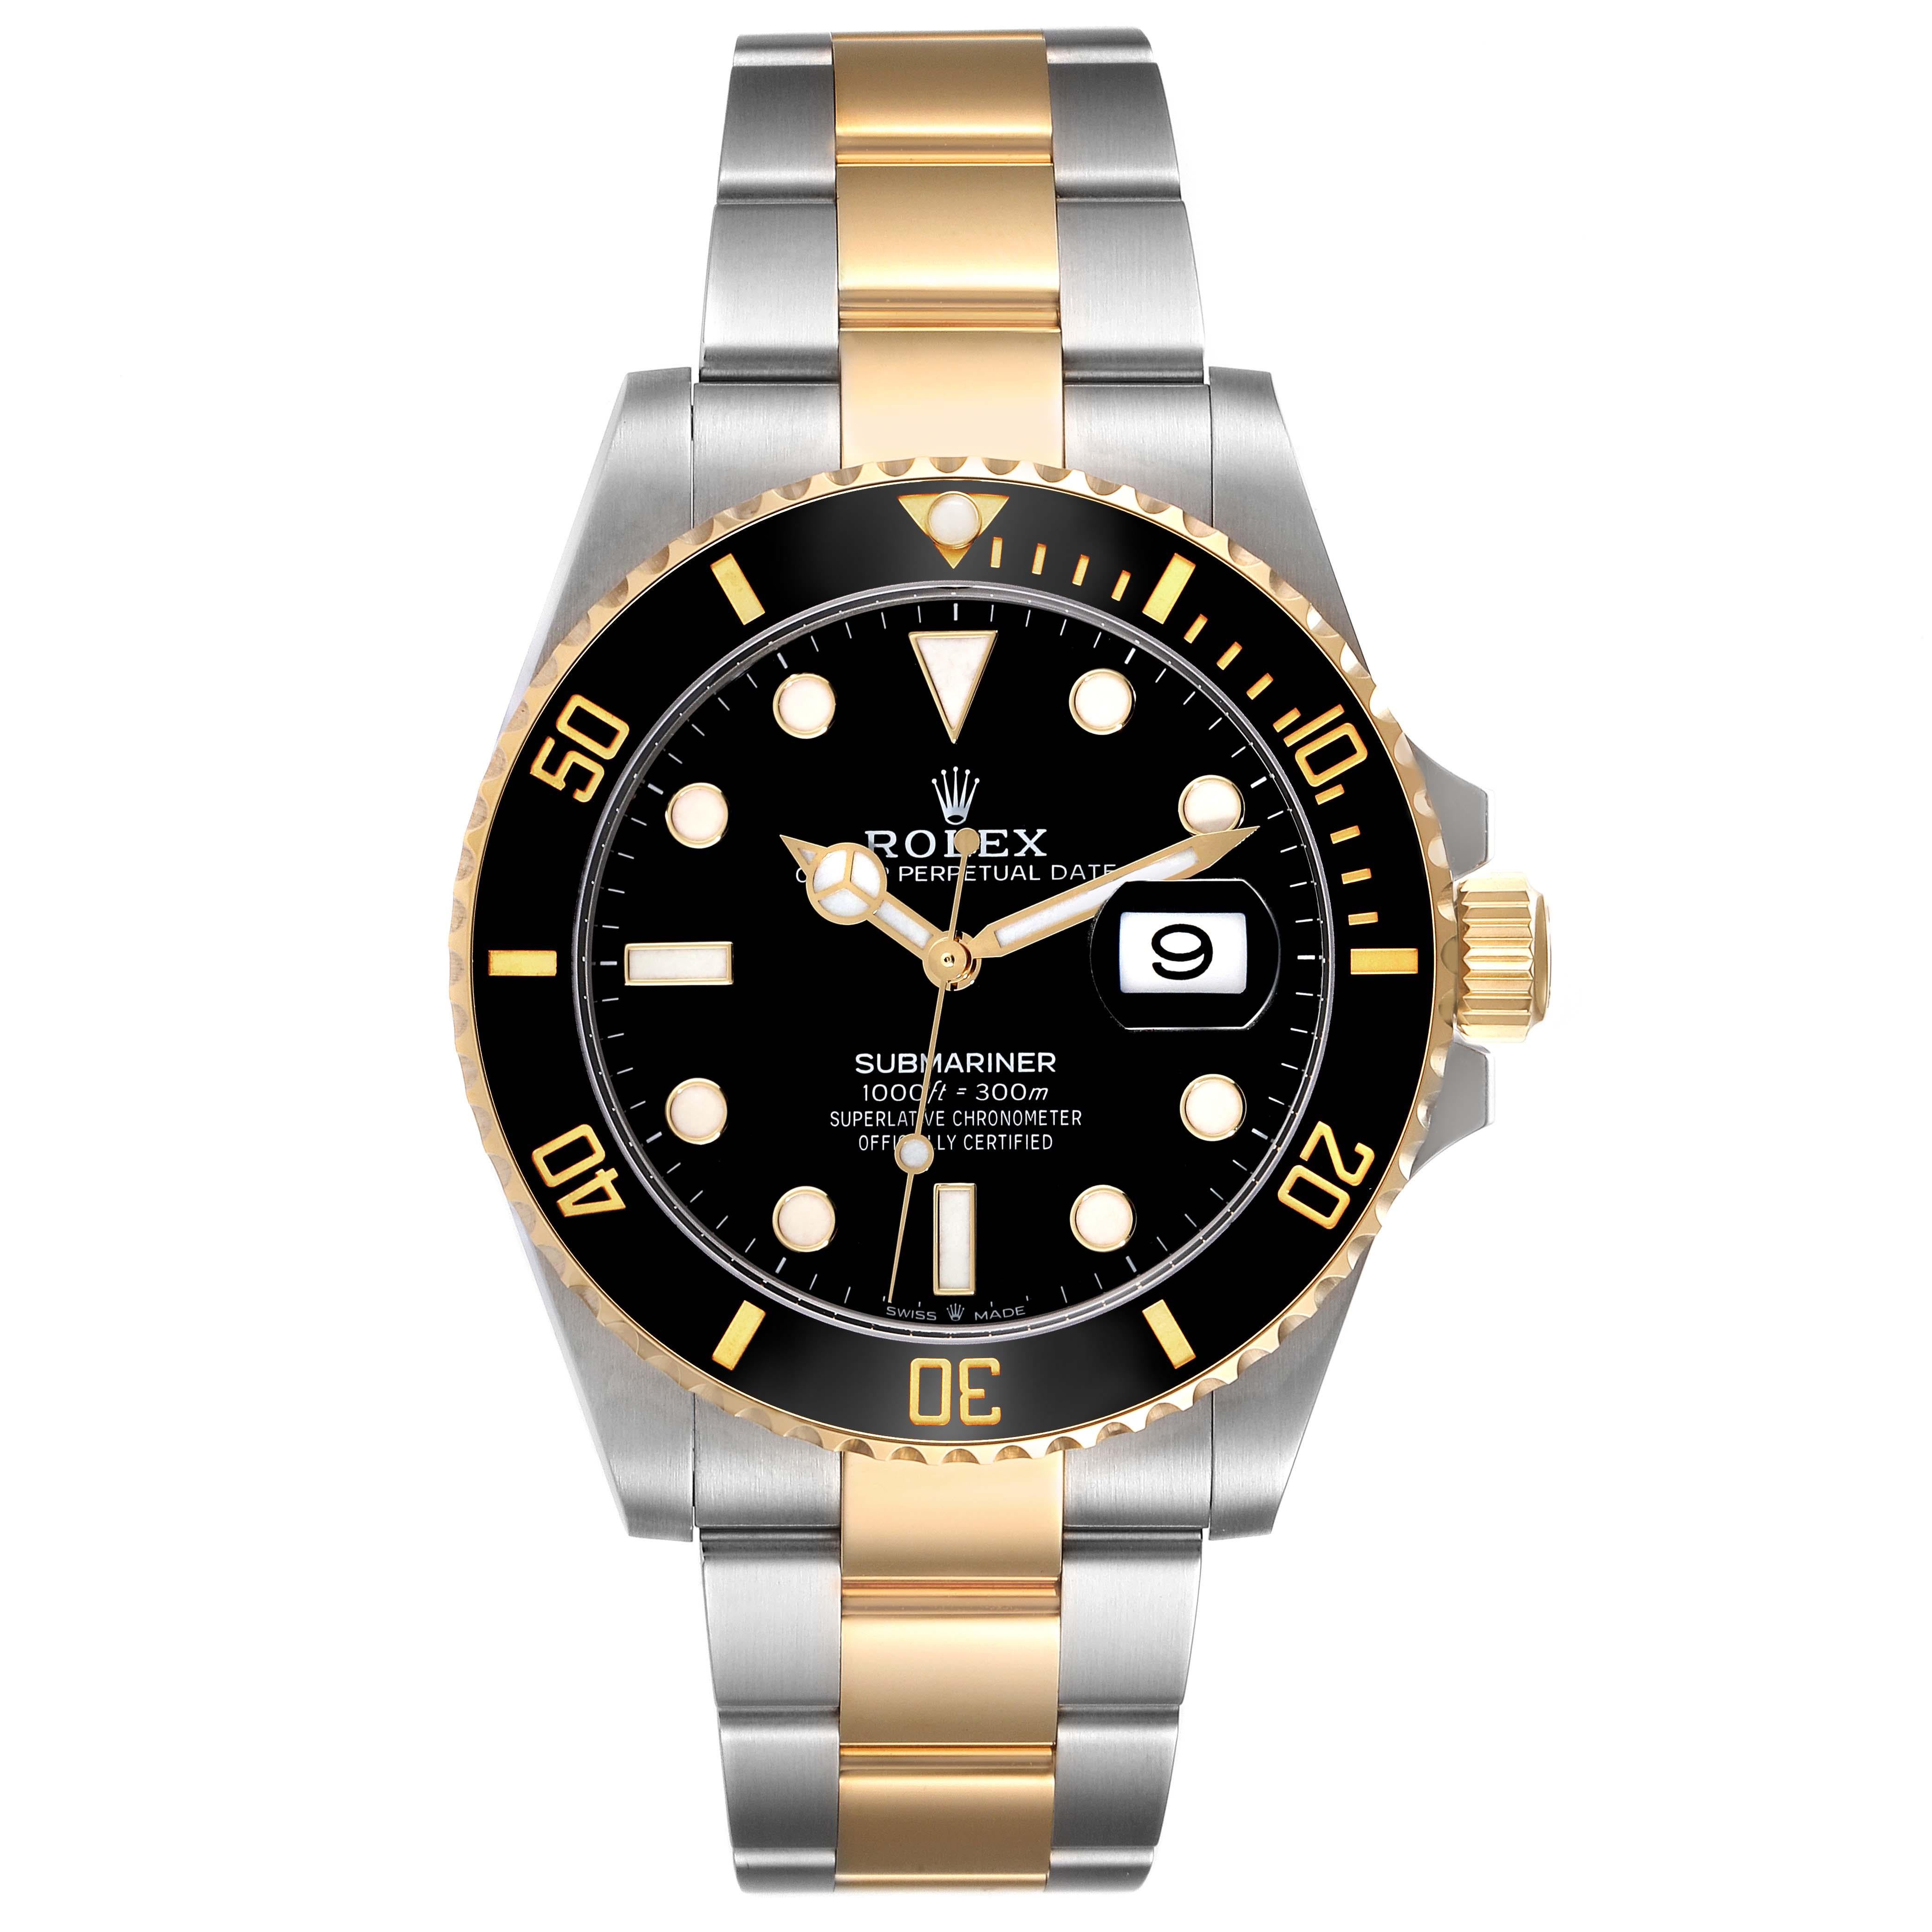 Rolex Submariner 41 Steel Yellow Gold Black Dial Mens Watch 126613 Box Card. Officially certified chronometer automatic self-winding movement. Stainless steel and 18k yellow gold case 41 mm in diameter. Rolex logo on the crown. Ceramic black